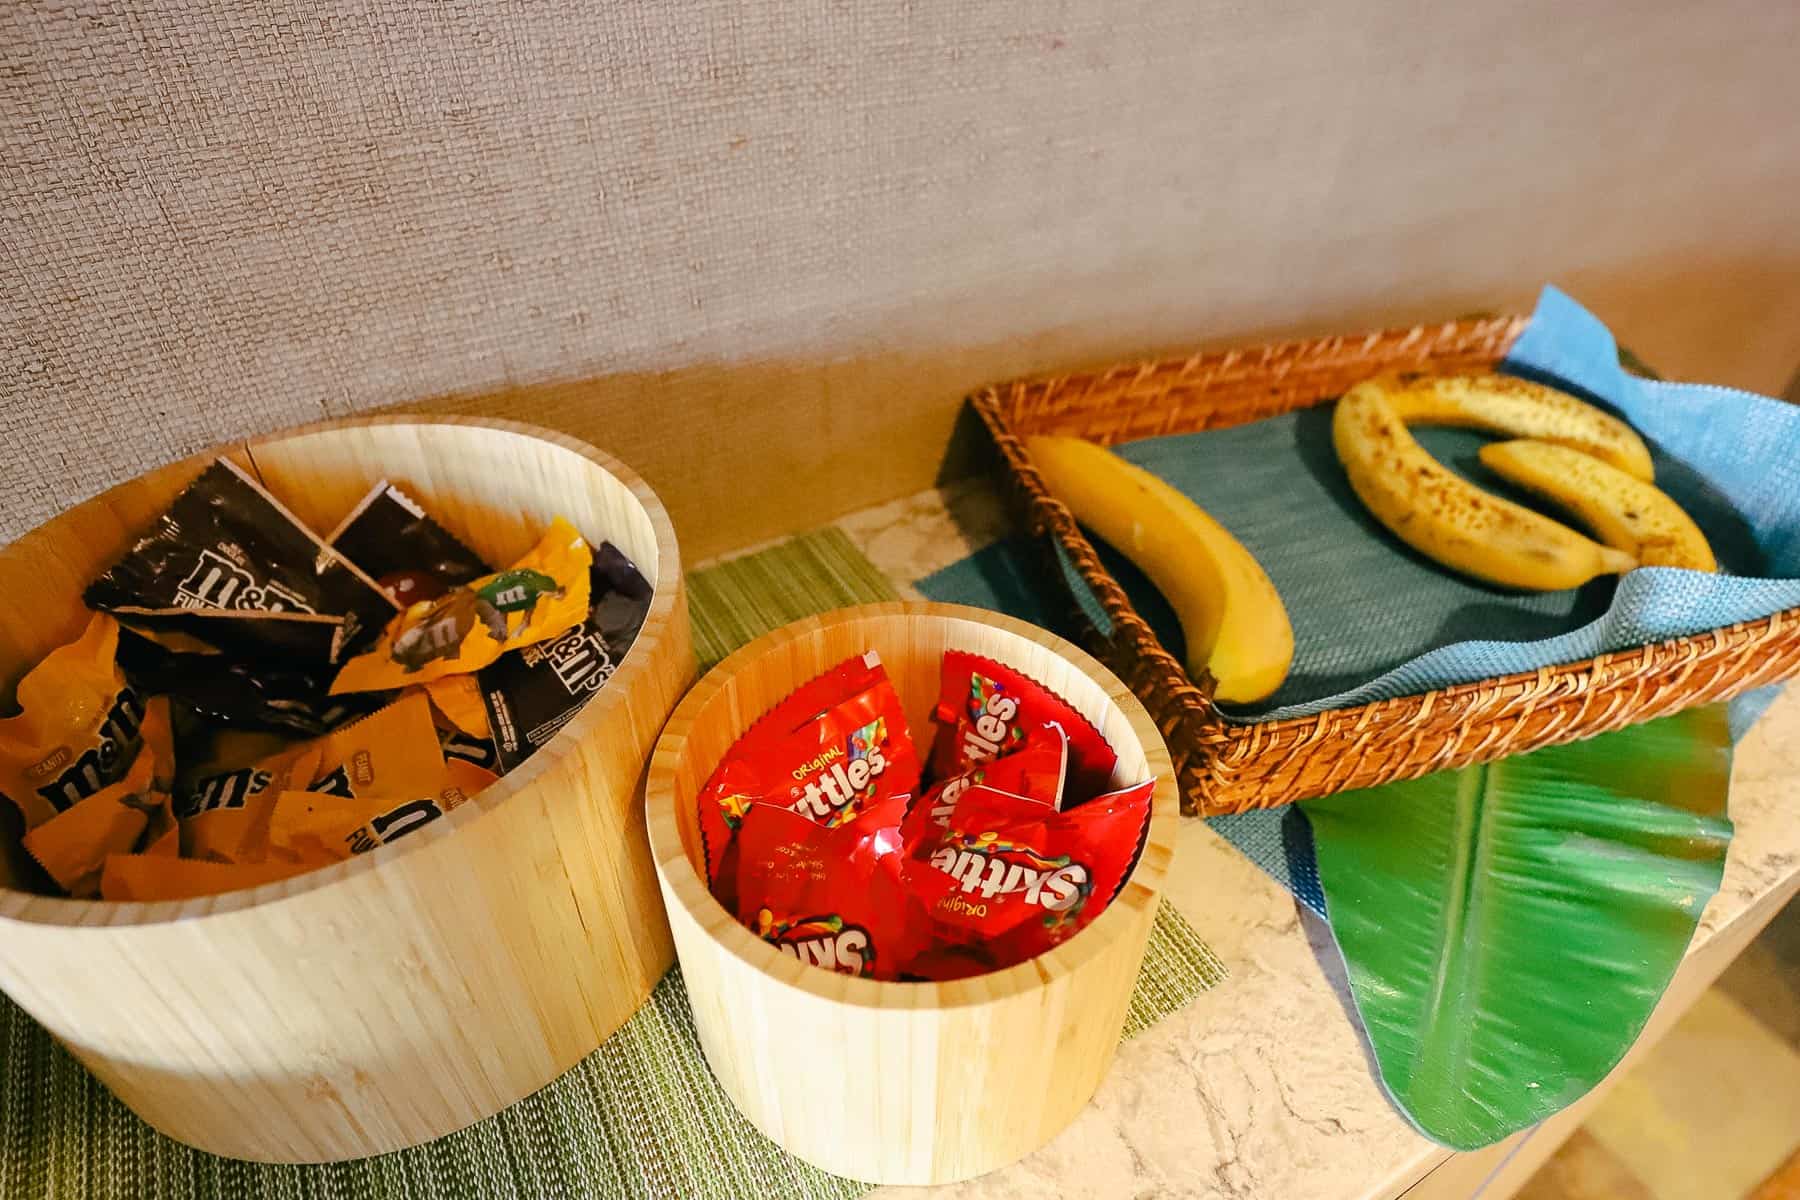 Skittles, Candy, and Bananas in the club lounge